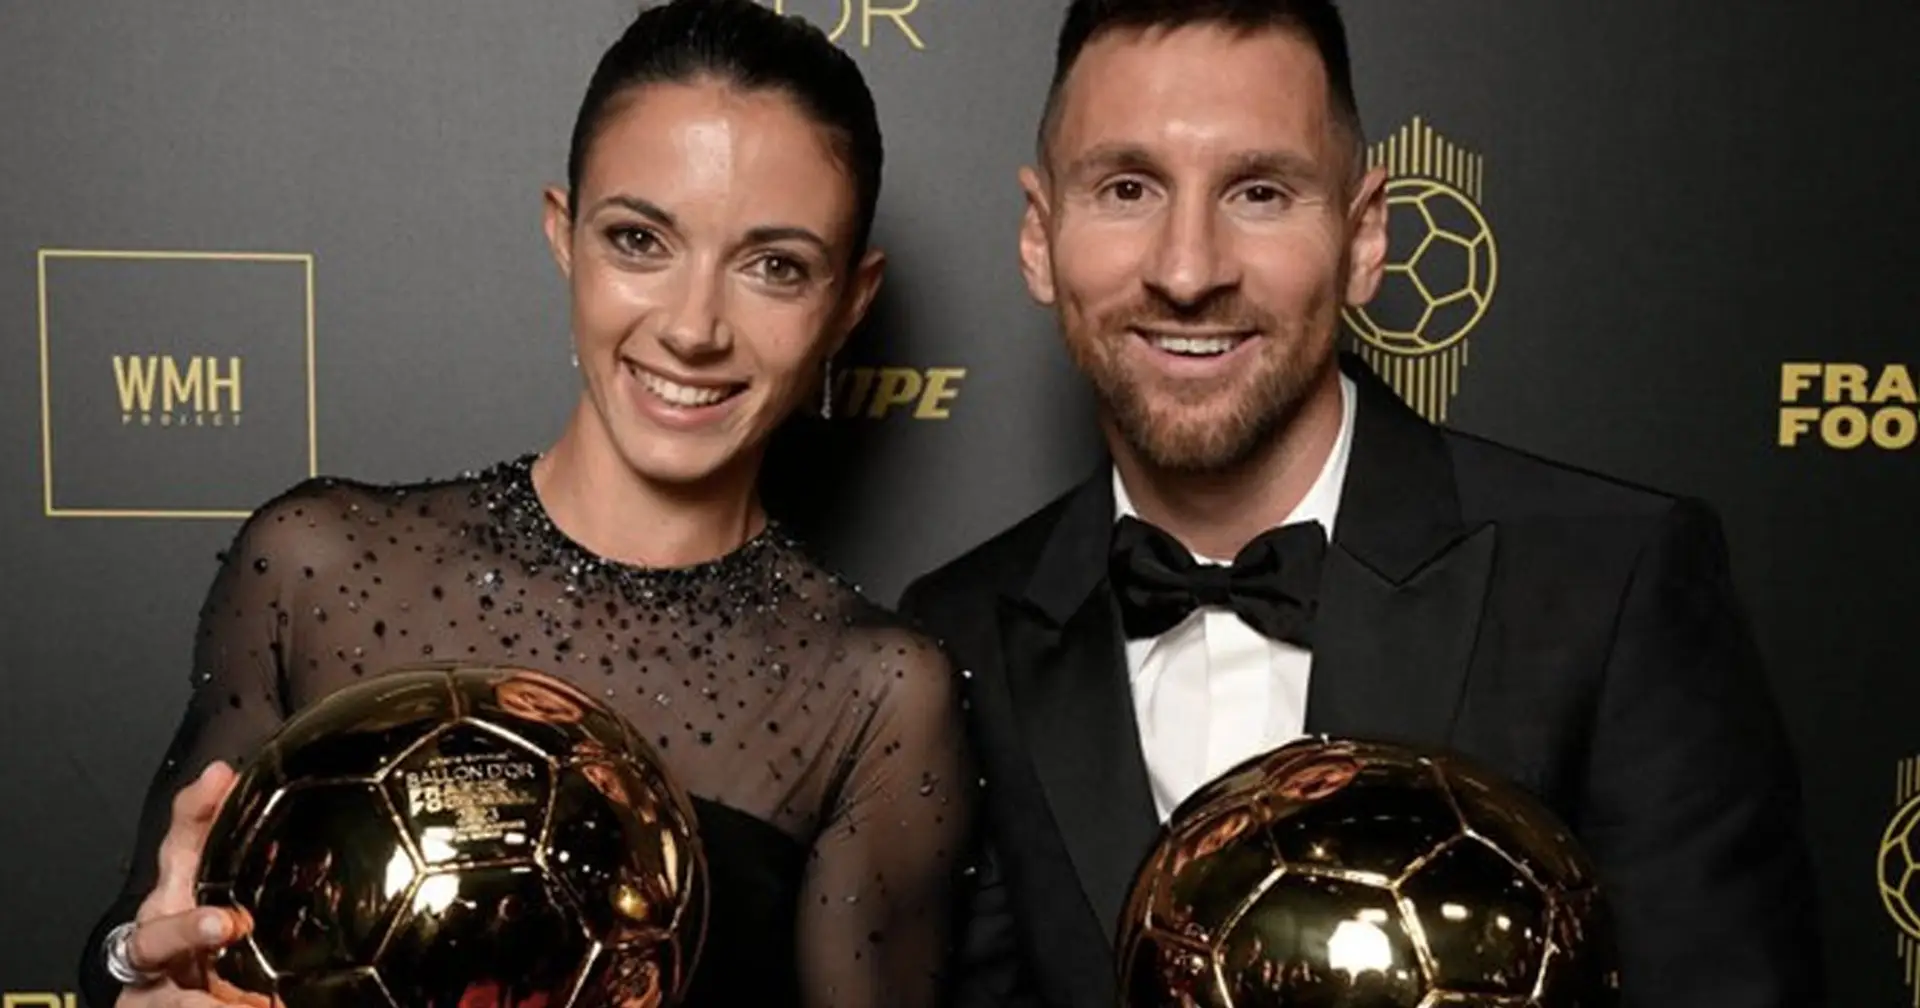 Aitana Bonmati's cheeky tweet from 2019 doing rounds again - has to do with Messi